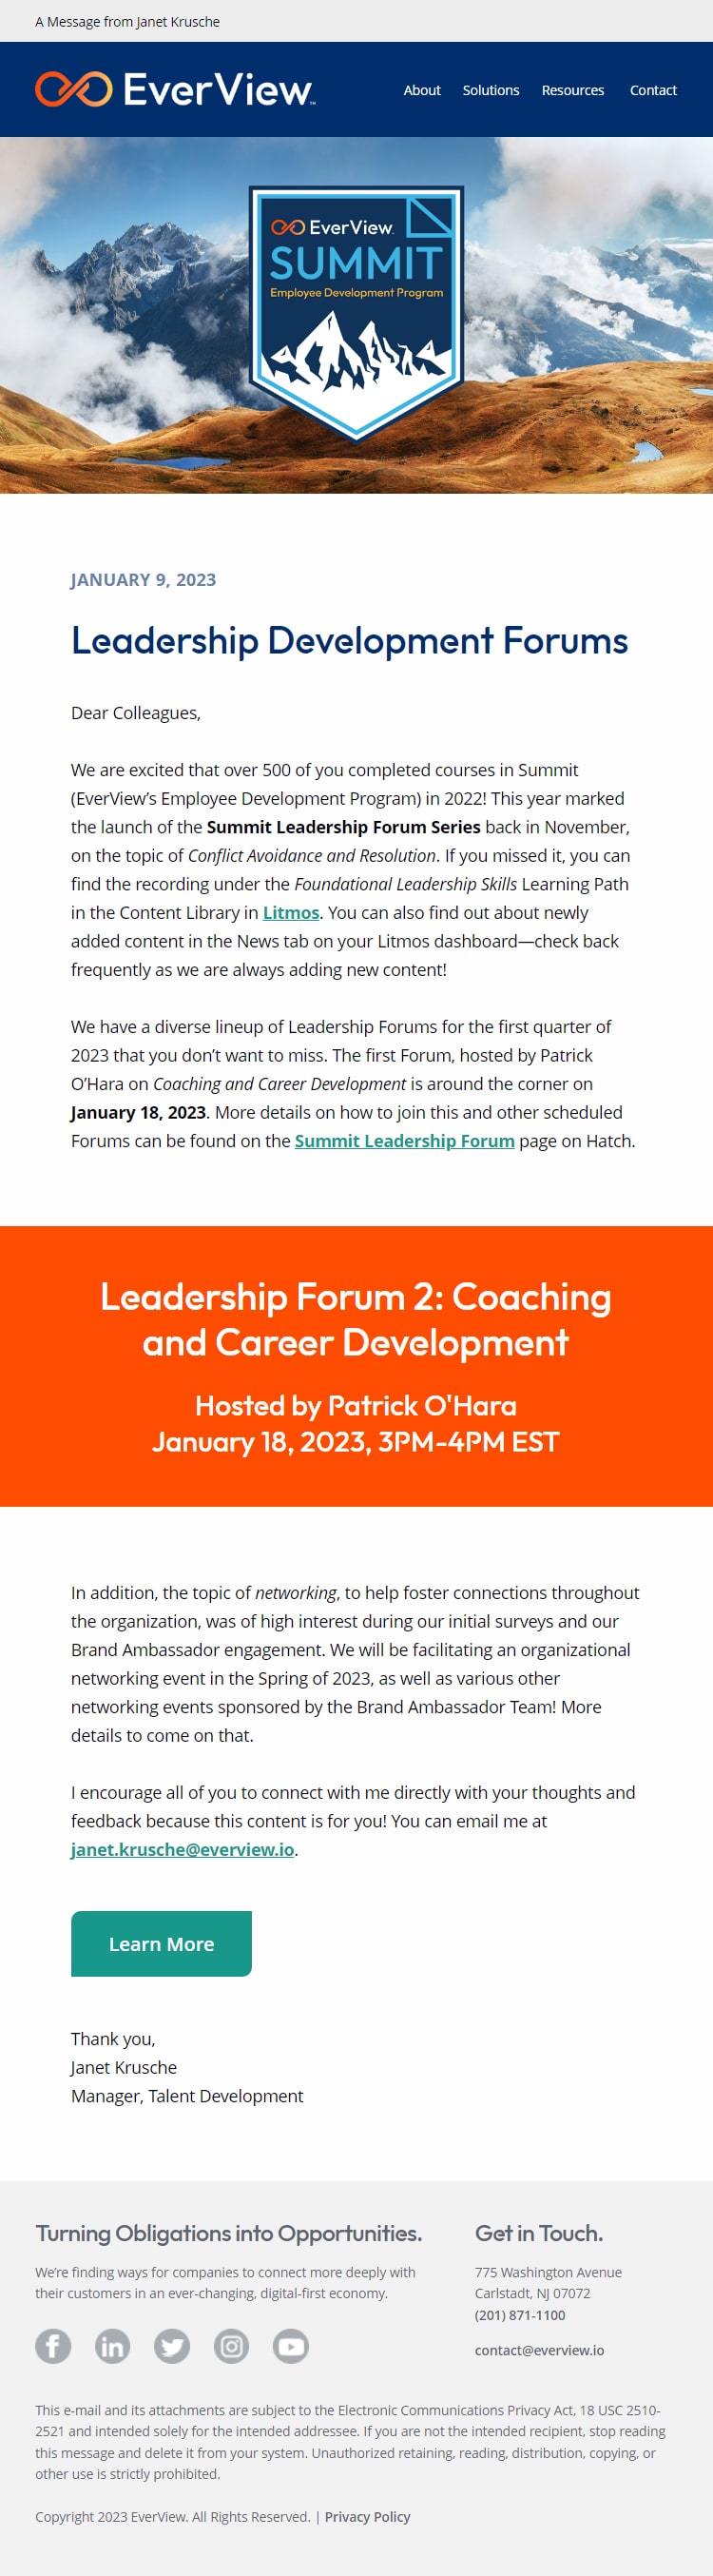 EverView Summit Leadership Forum Email